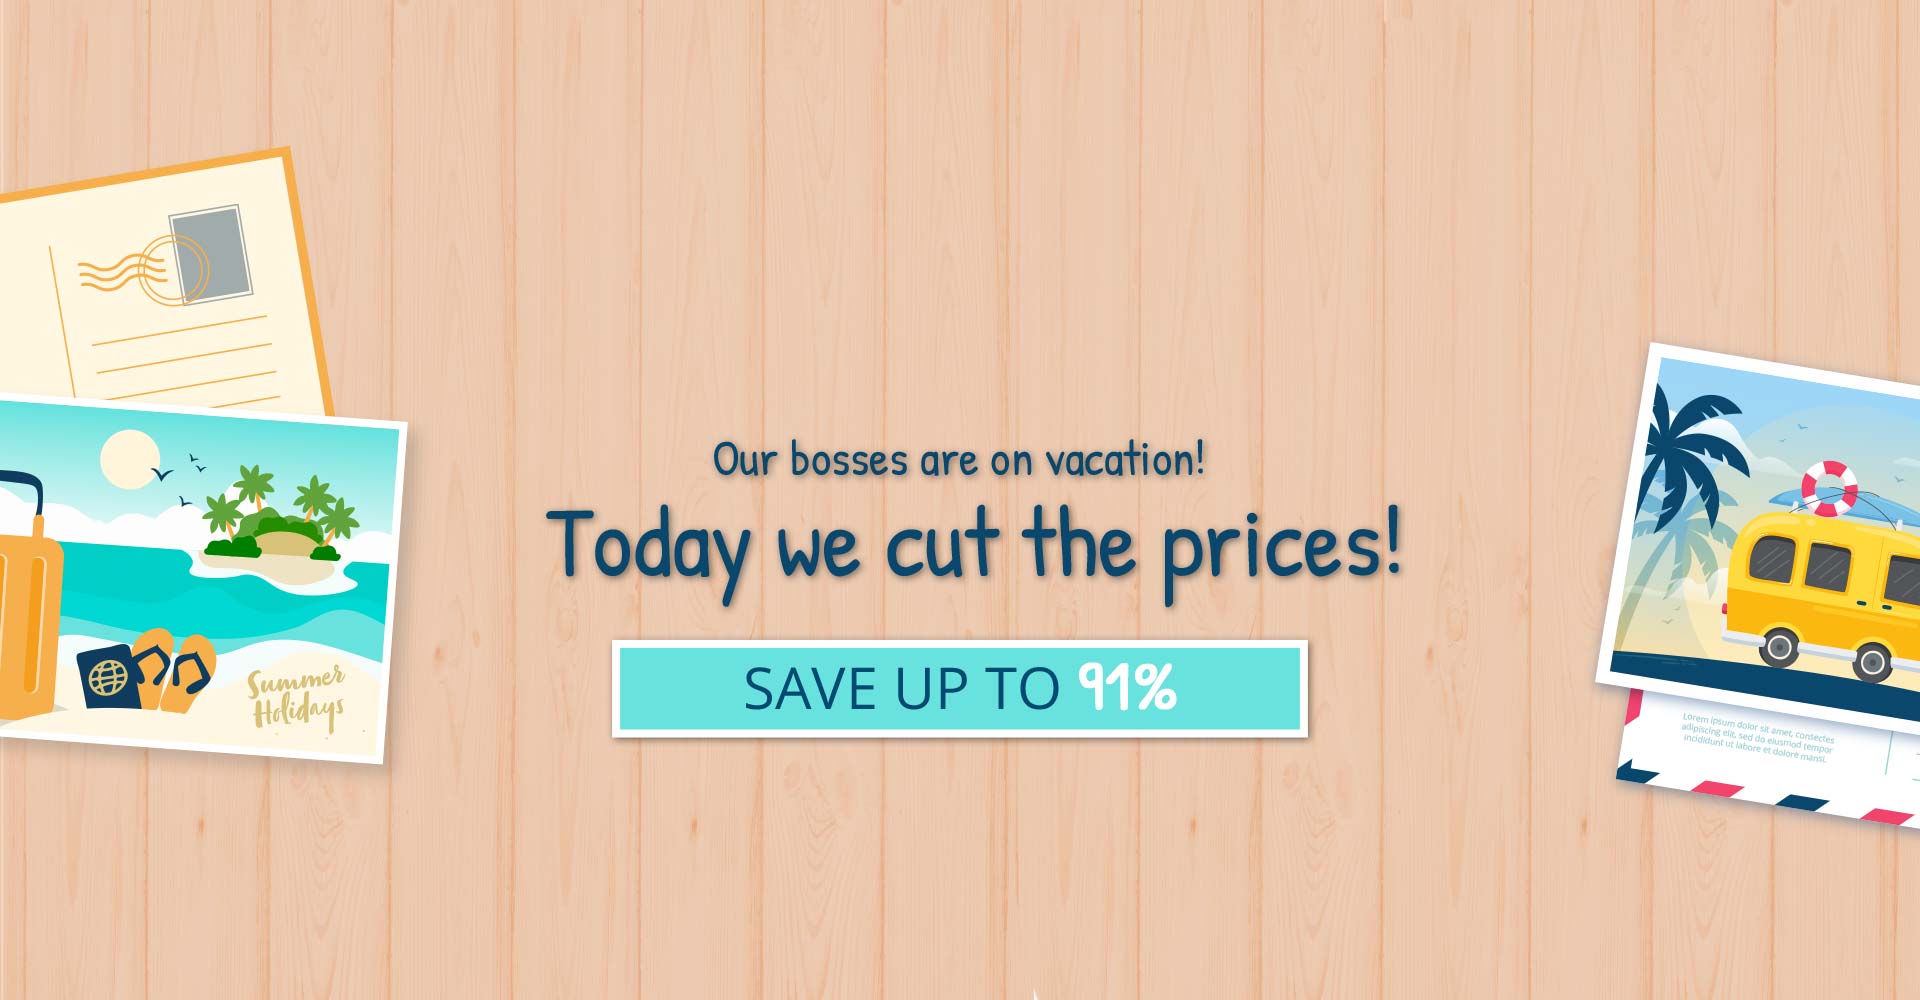 Ashampoo is launching their Price Cut Promotion on August 16th and will be live until August 22nd.